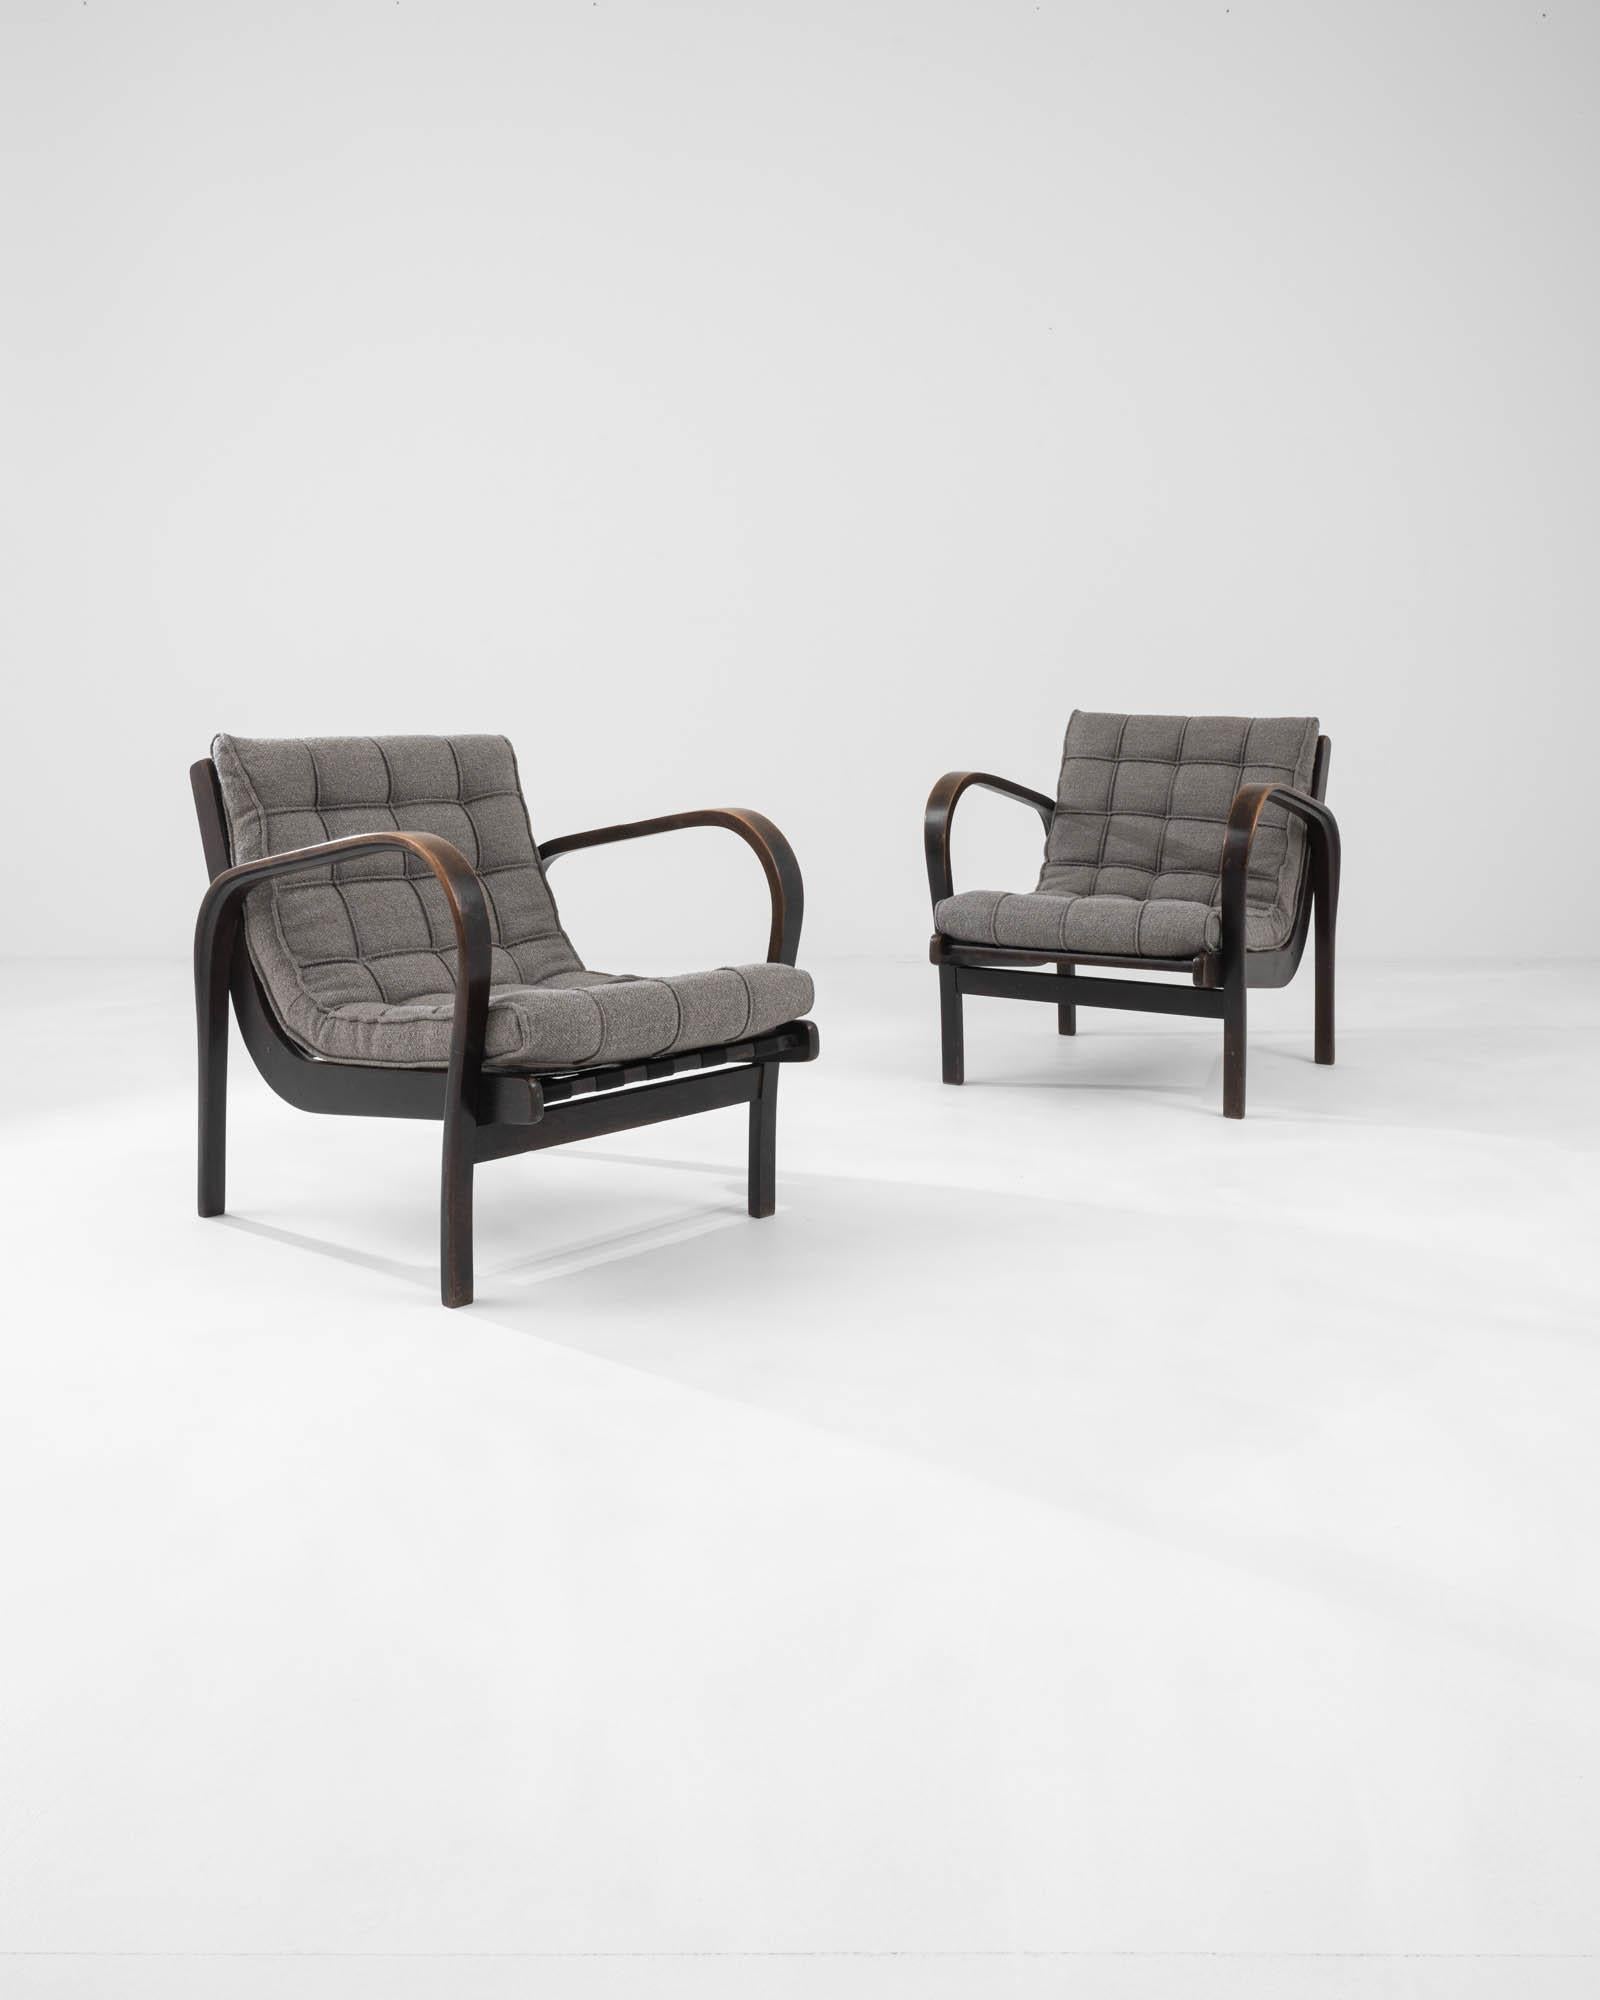 A pair of wooden upholstered armchairs created in 20th century Czechia by Kropȧček &
Koželka. Presenting a sleek yet inviting aura, this pair of chairs exudes a sense of classic mid-century character. Two sumptuously steam-bent arms float over the